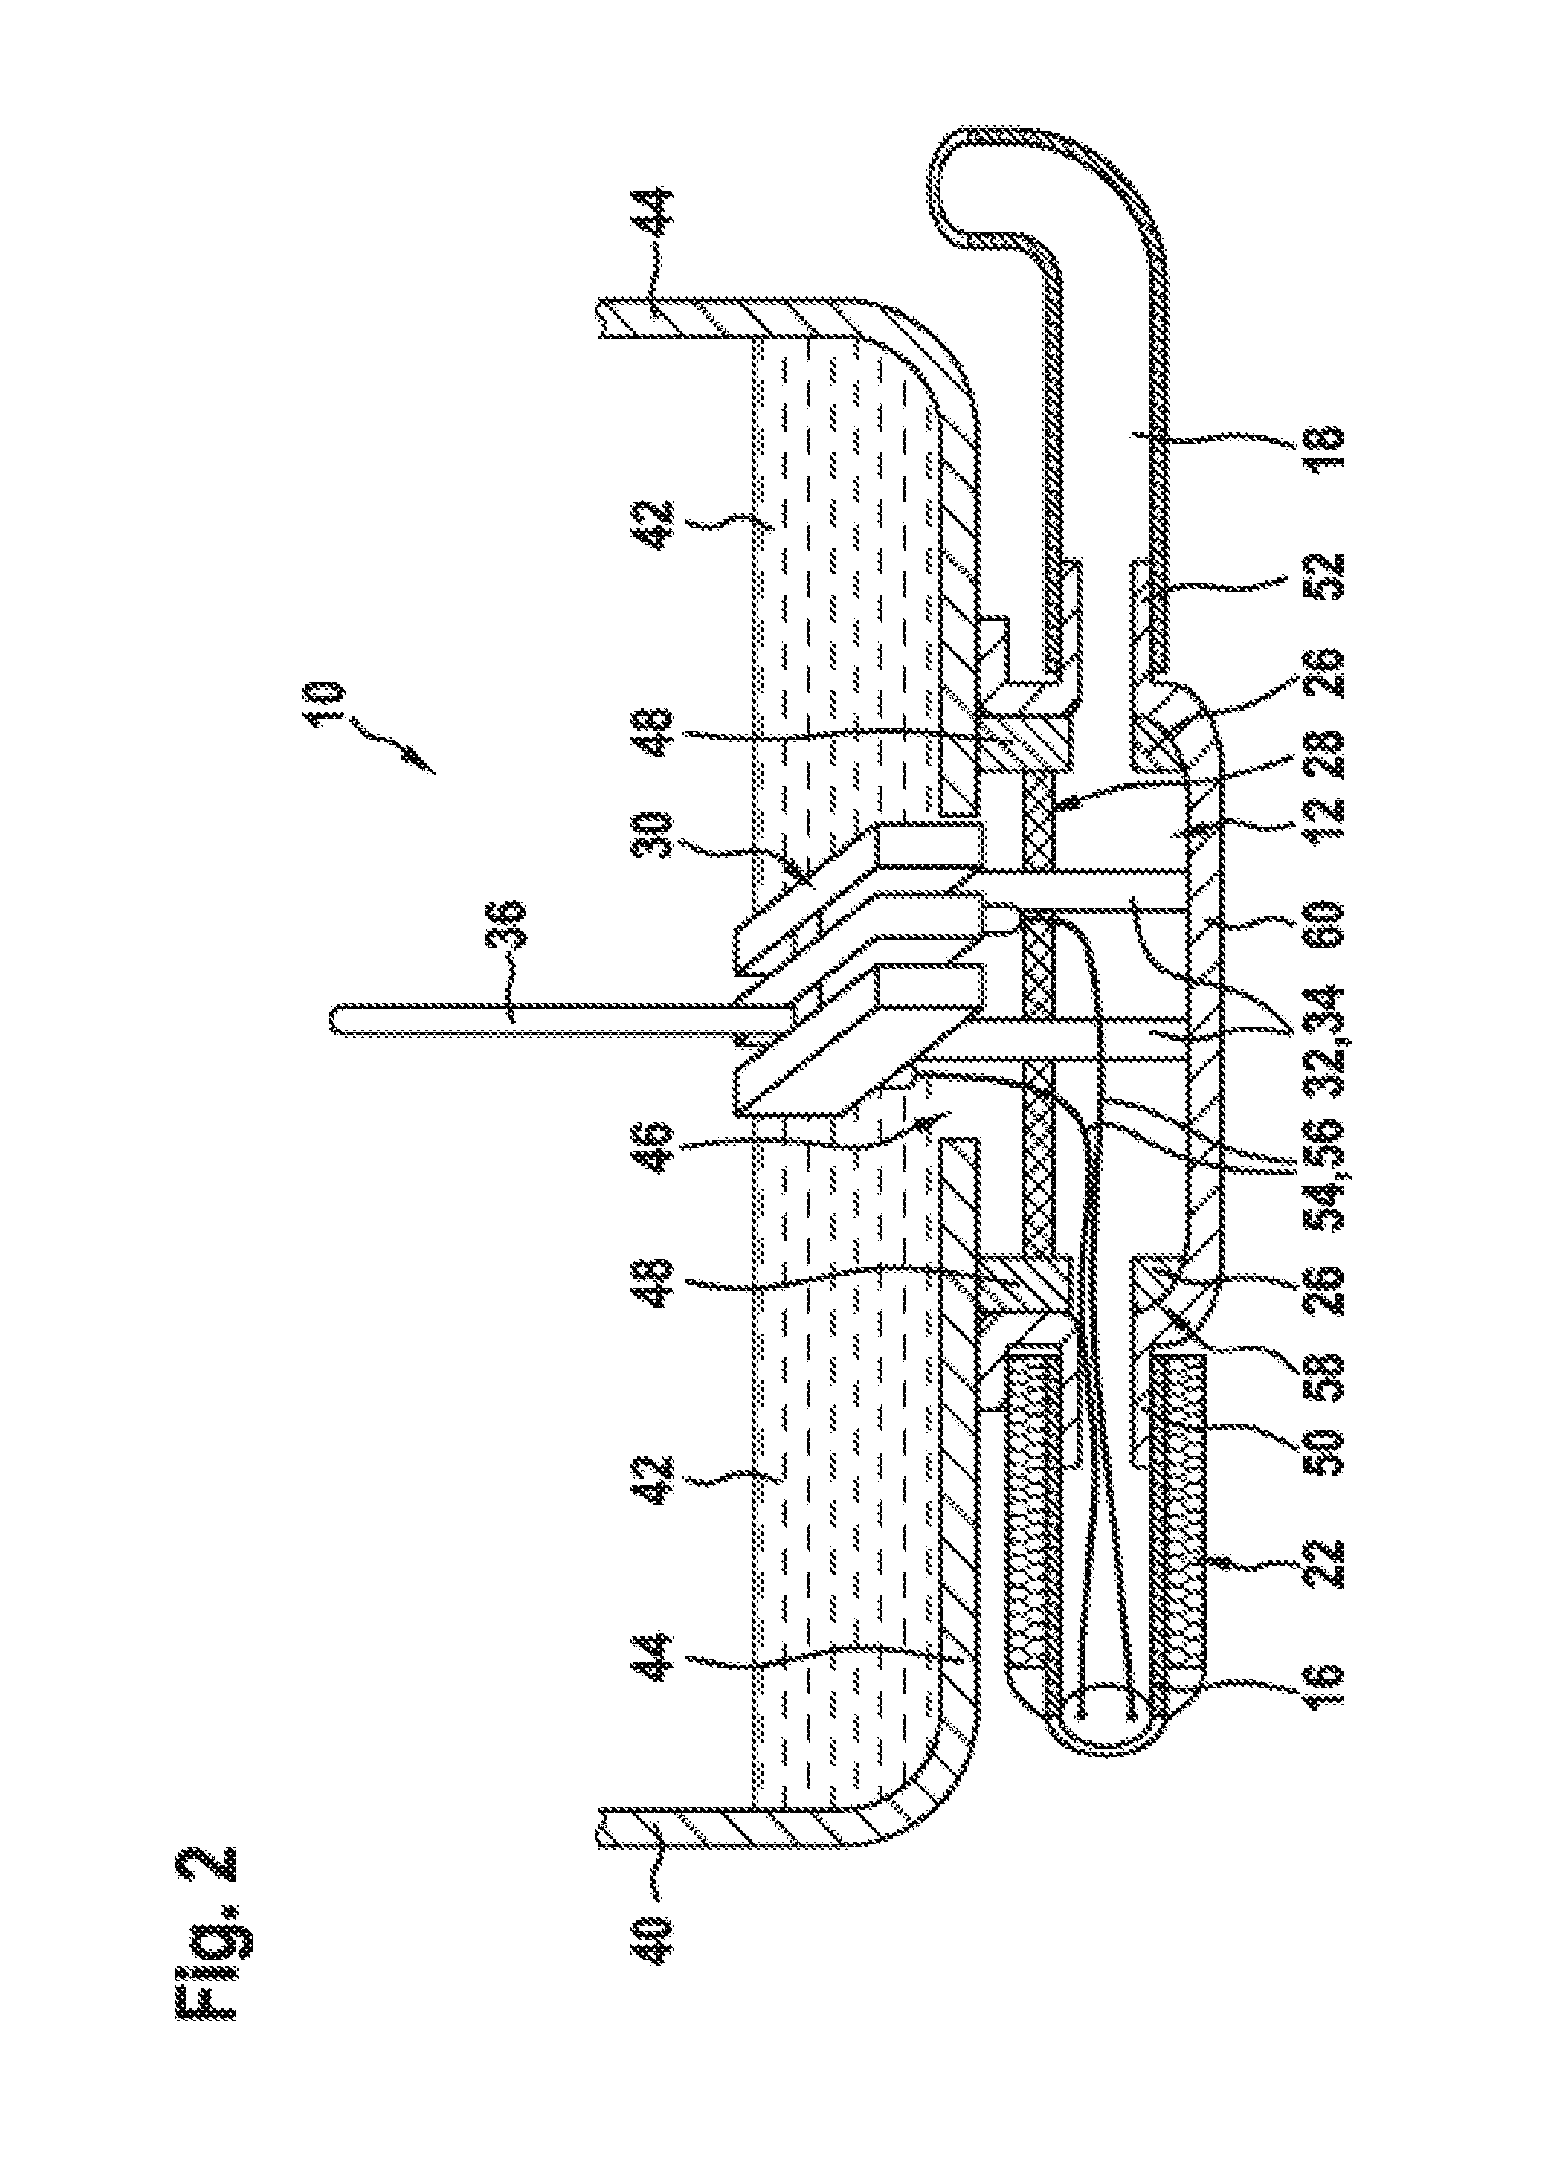 Device for supplying a reducing agent to an exhaust-gas aftertreatment system